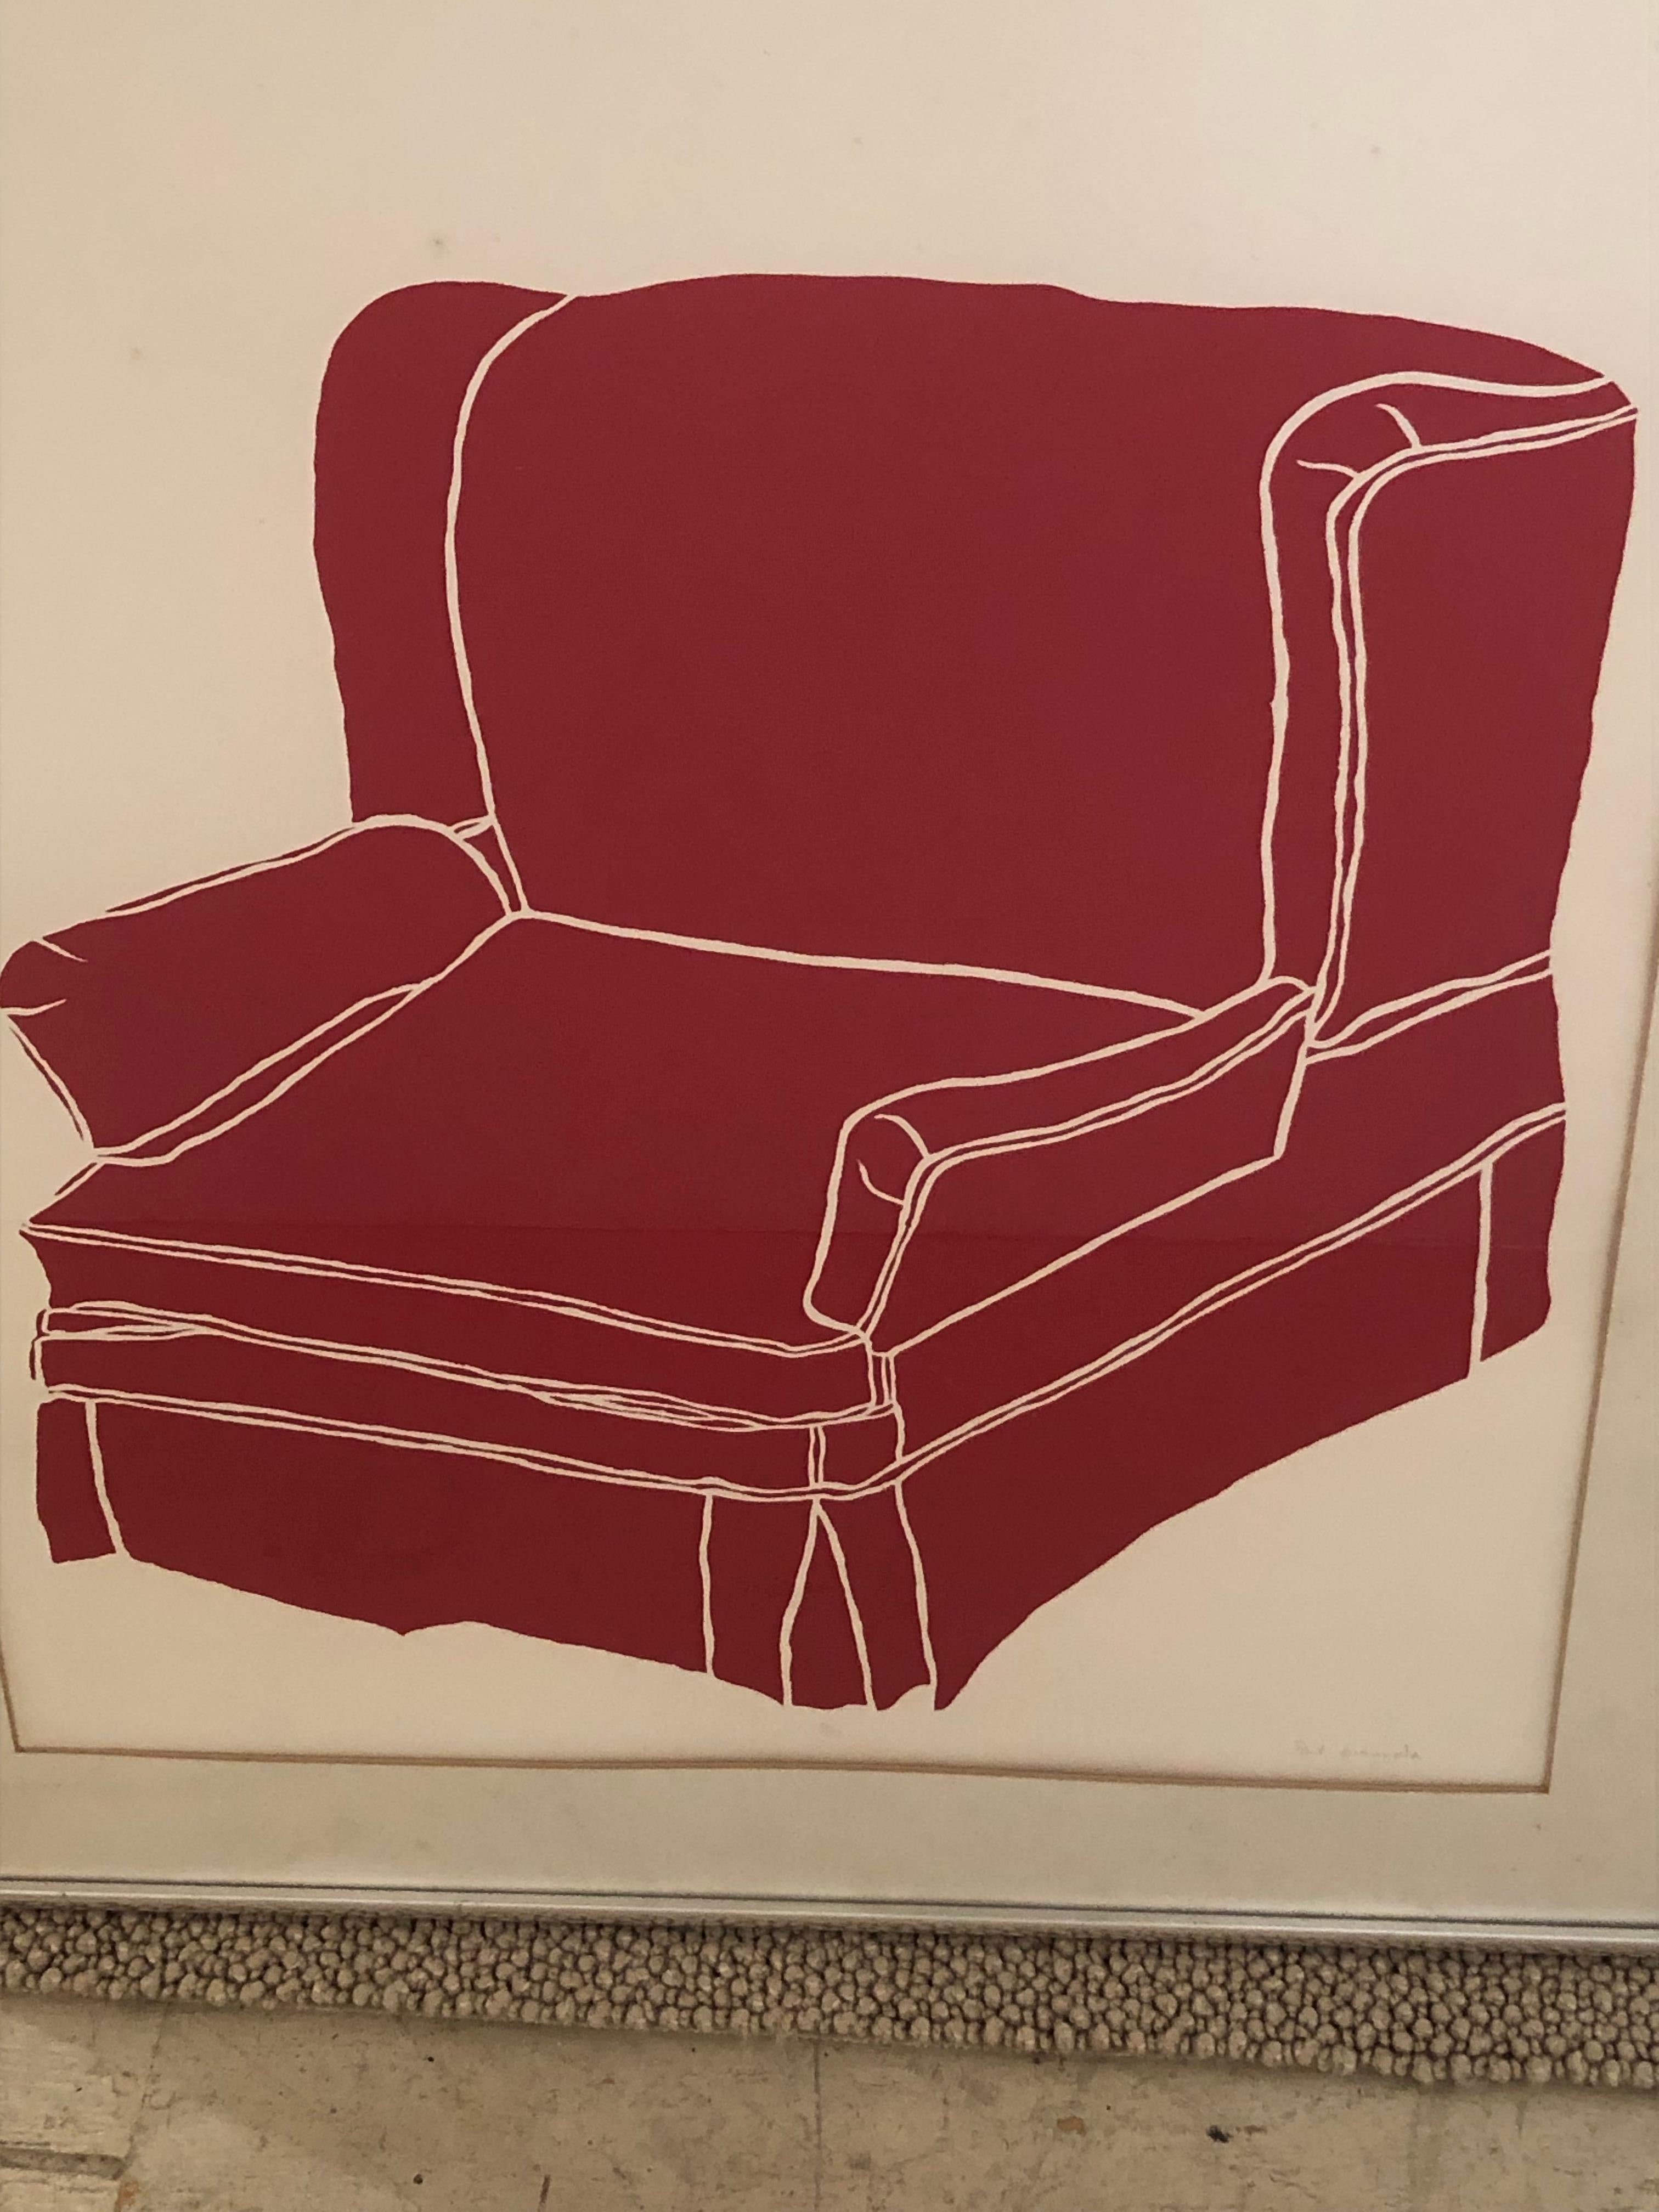 Signed and numbered silkscreen print of a red club chair, #9/12, by NJ contemporary artist Paul Giancola.  The flattened perspective and simple lines are reminiscent of illustrationm art and very striking.  Recommend re-matting and new glass.
